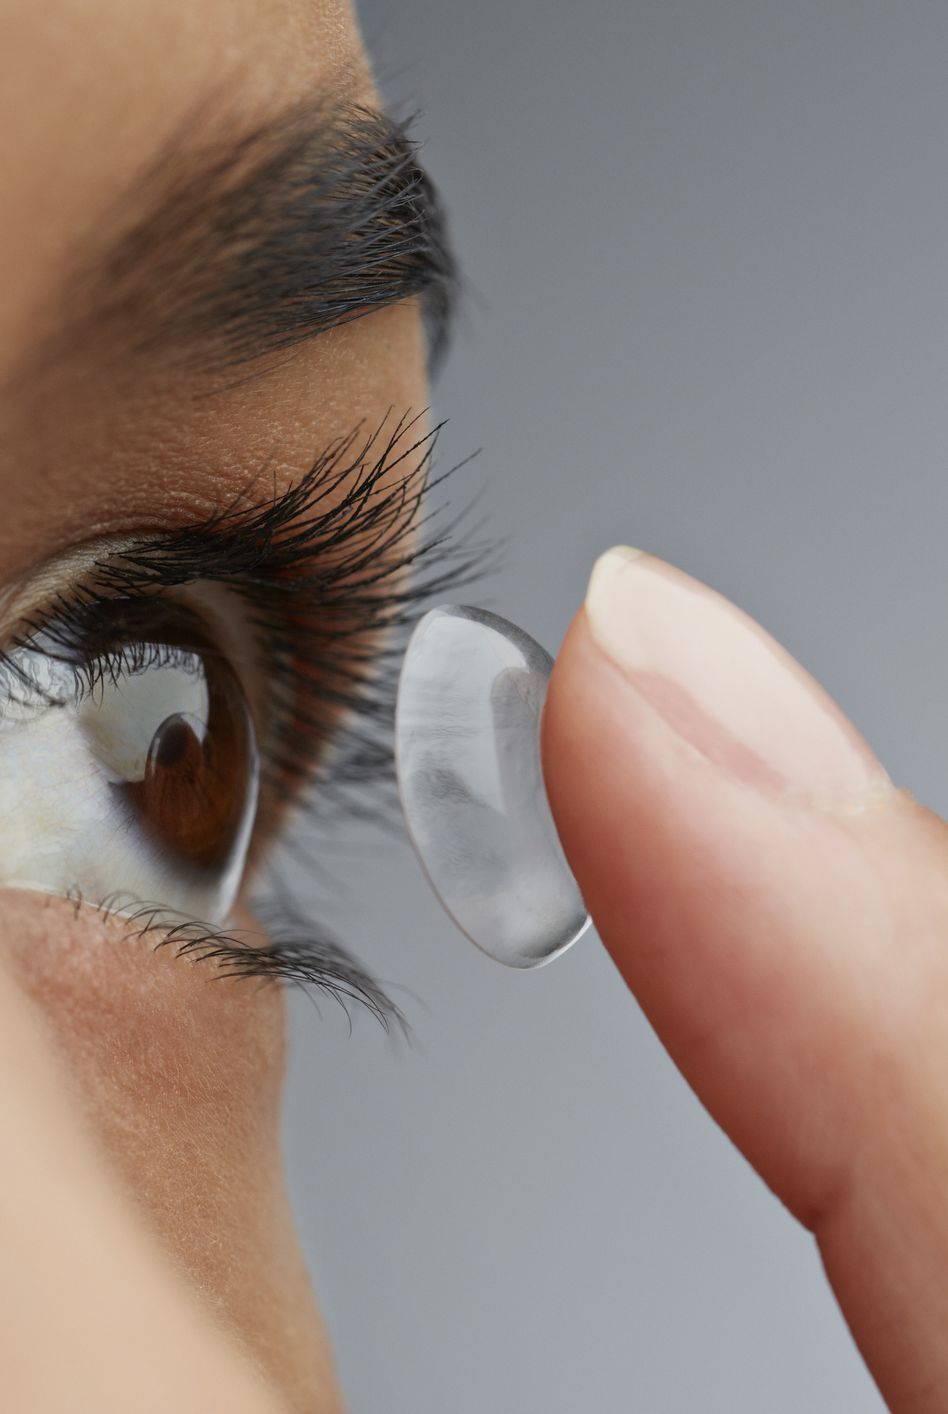 How Drinking Alcohol Affects Your Eyes And Contact Lenses